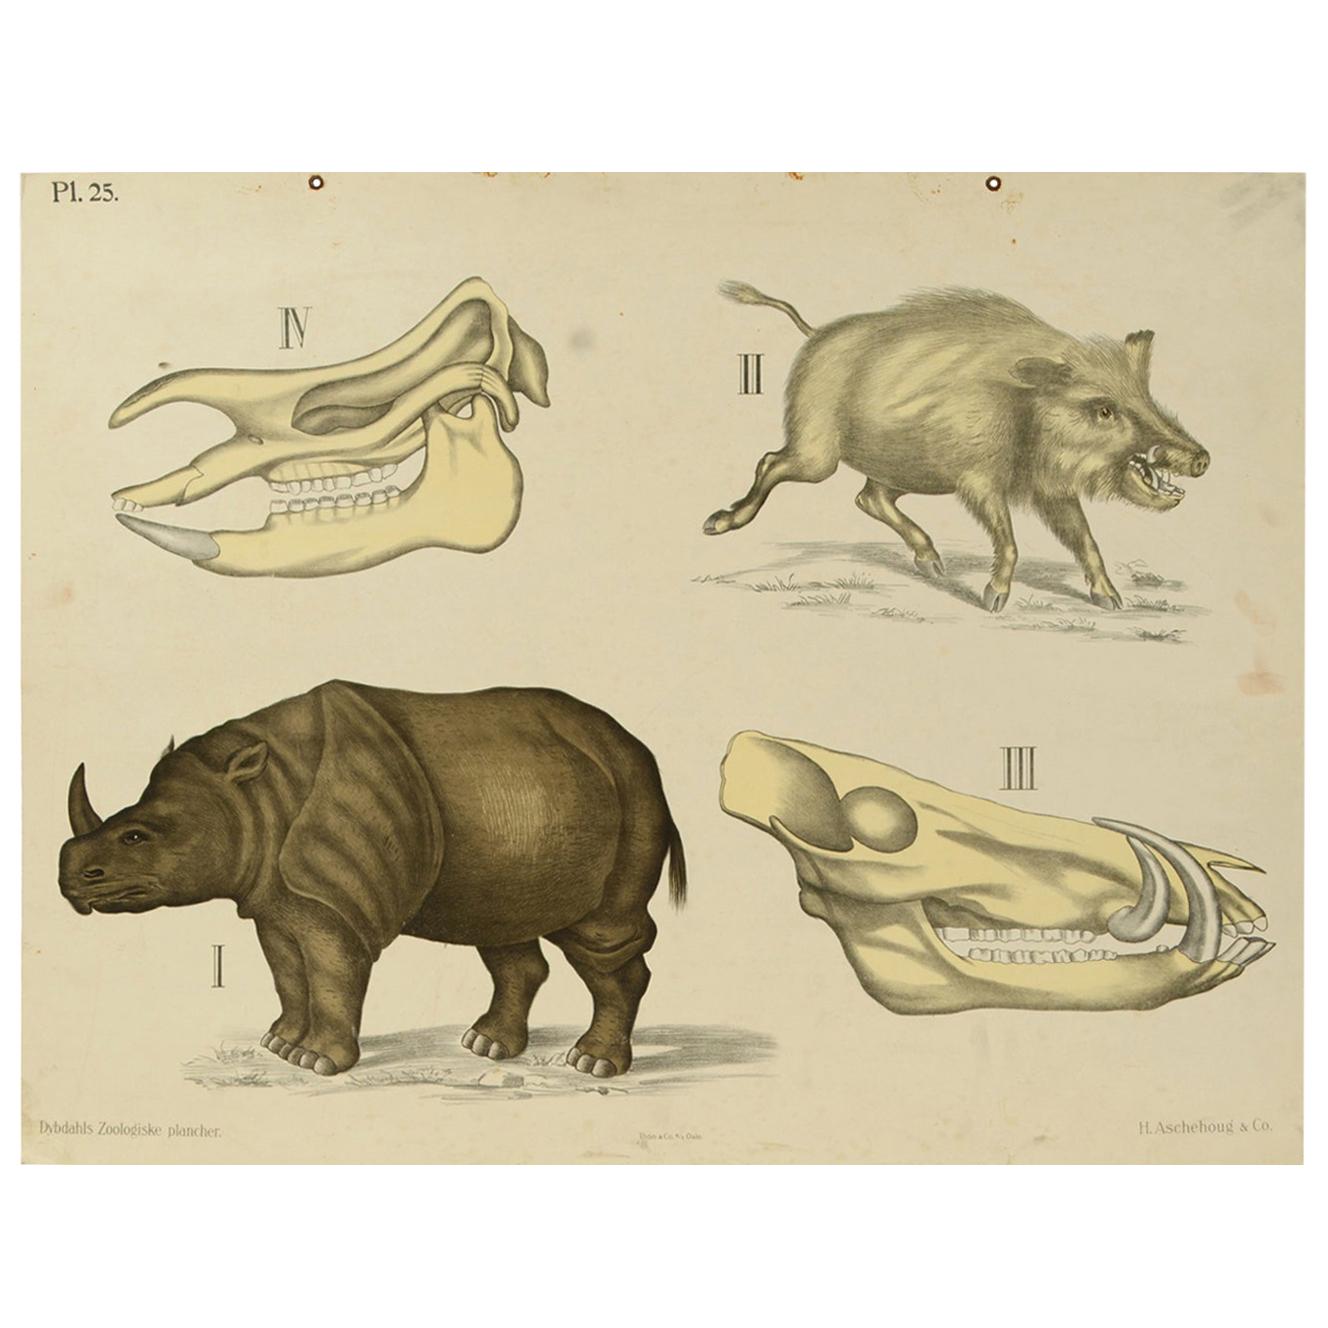 Zoological Lithograph of ungulates 1912 on Cardboard by H Aschehoug & Co, Norway